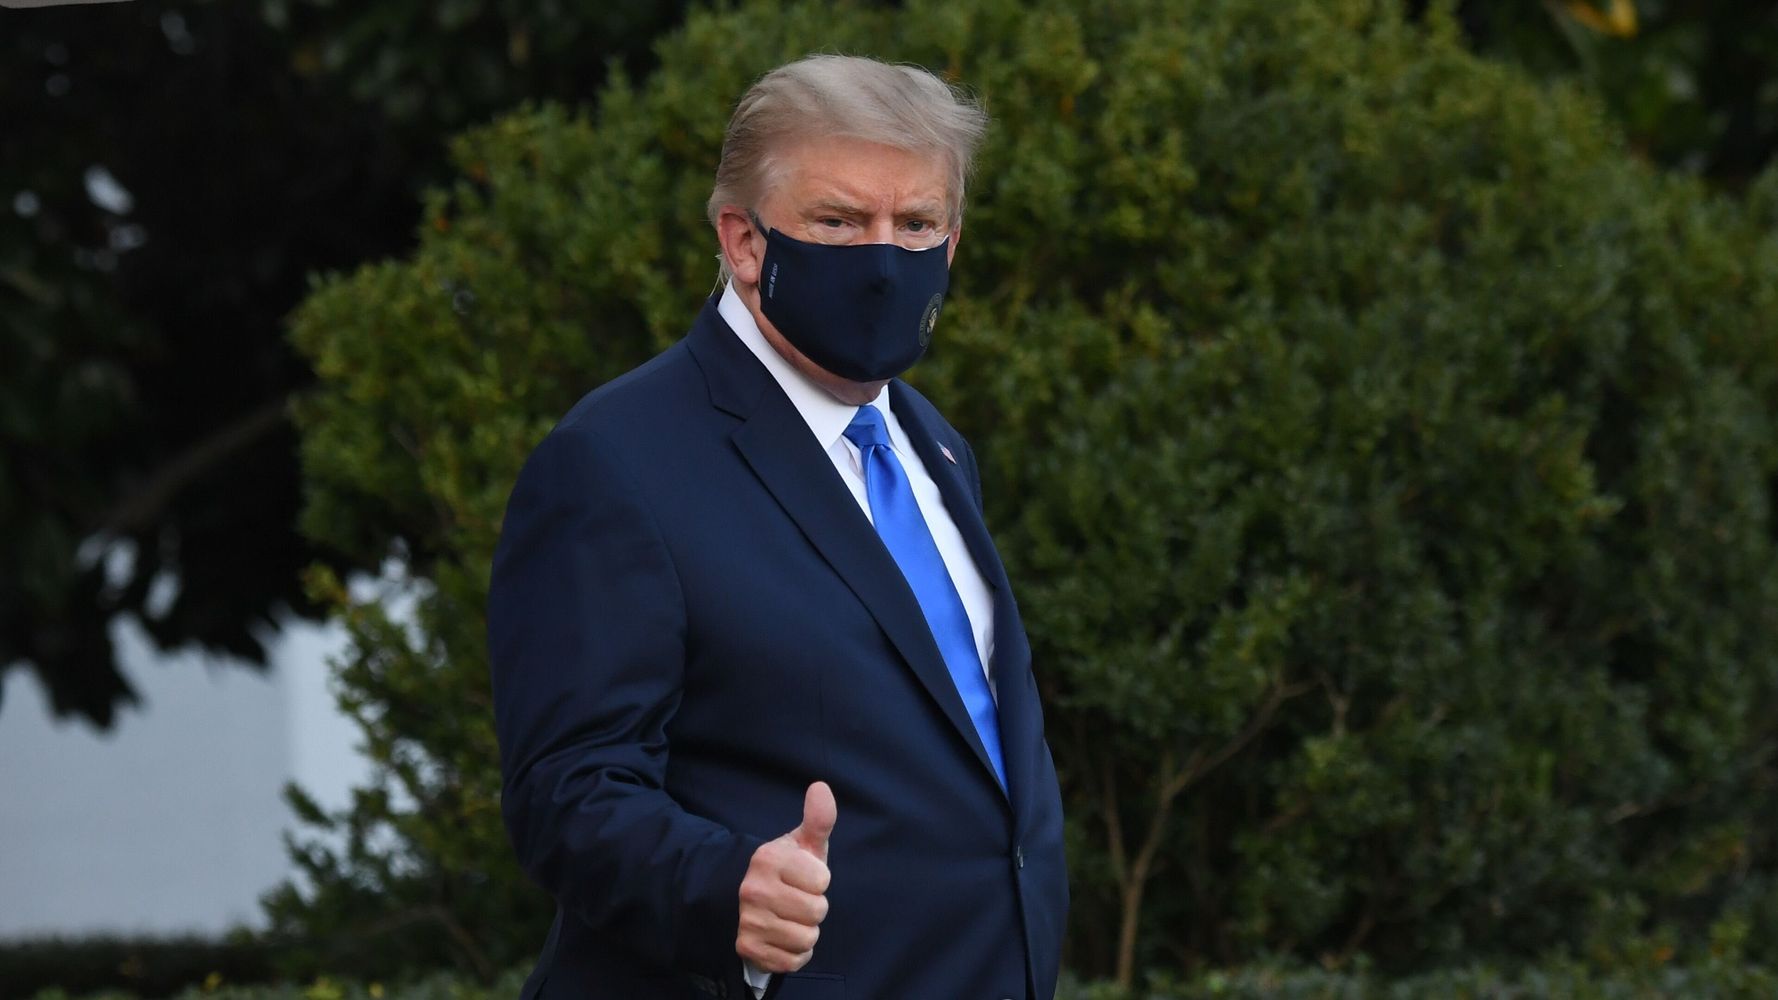 What We Know About Trump’s Condition After Contracting COVID-19